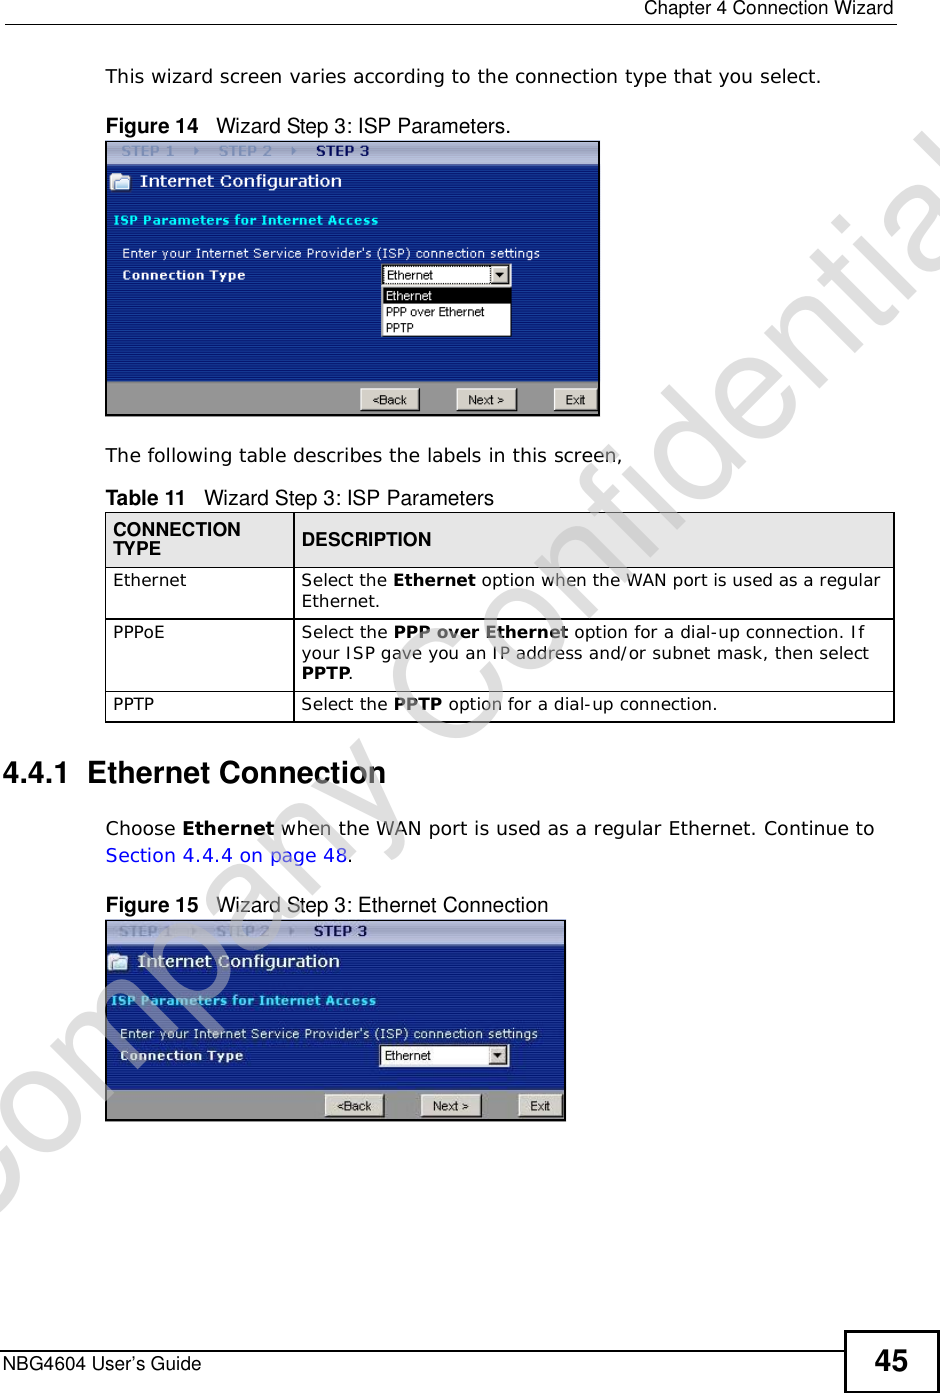  Chapter 4Connection WizardNBG4604 User’s Guide 45This wizard screen varies according to the connection type that you select.Figure 14   Wizard Step 3: ISP Parameters.The following table describes the labels in this screen,4.4.1  Ethernet ConnectionChoose Ethernet when the WAN port is used as a regular Ethernet. Continue to Section 4.4.4 on page 48.Figure 15   Wizard Step 3: Ethernet ConnectionTable 11   Wizard Step 3: ISP ParametersCONNECTION TYPE DESCRIPTIONEthernetSelect the Ethernet option when the WAN port is used as a regular Ethernet. PPPoE Select the PPP over Ethernet option for a dial-up connection. If your ISP gave you an IP address and/or subnet mask, then select PPTP.PPTPSelect the PPTP option for a dial-up connection.Company Confidential